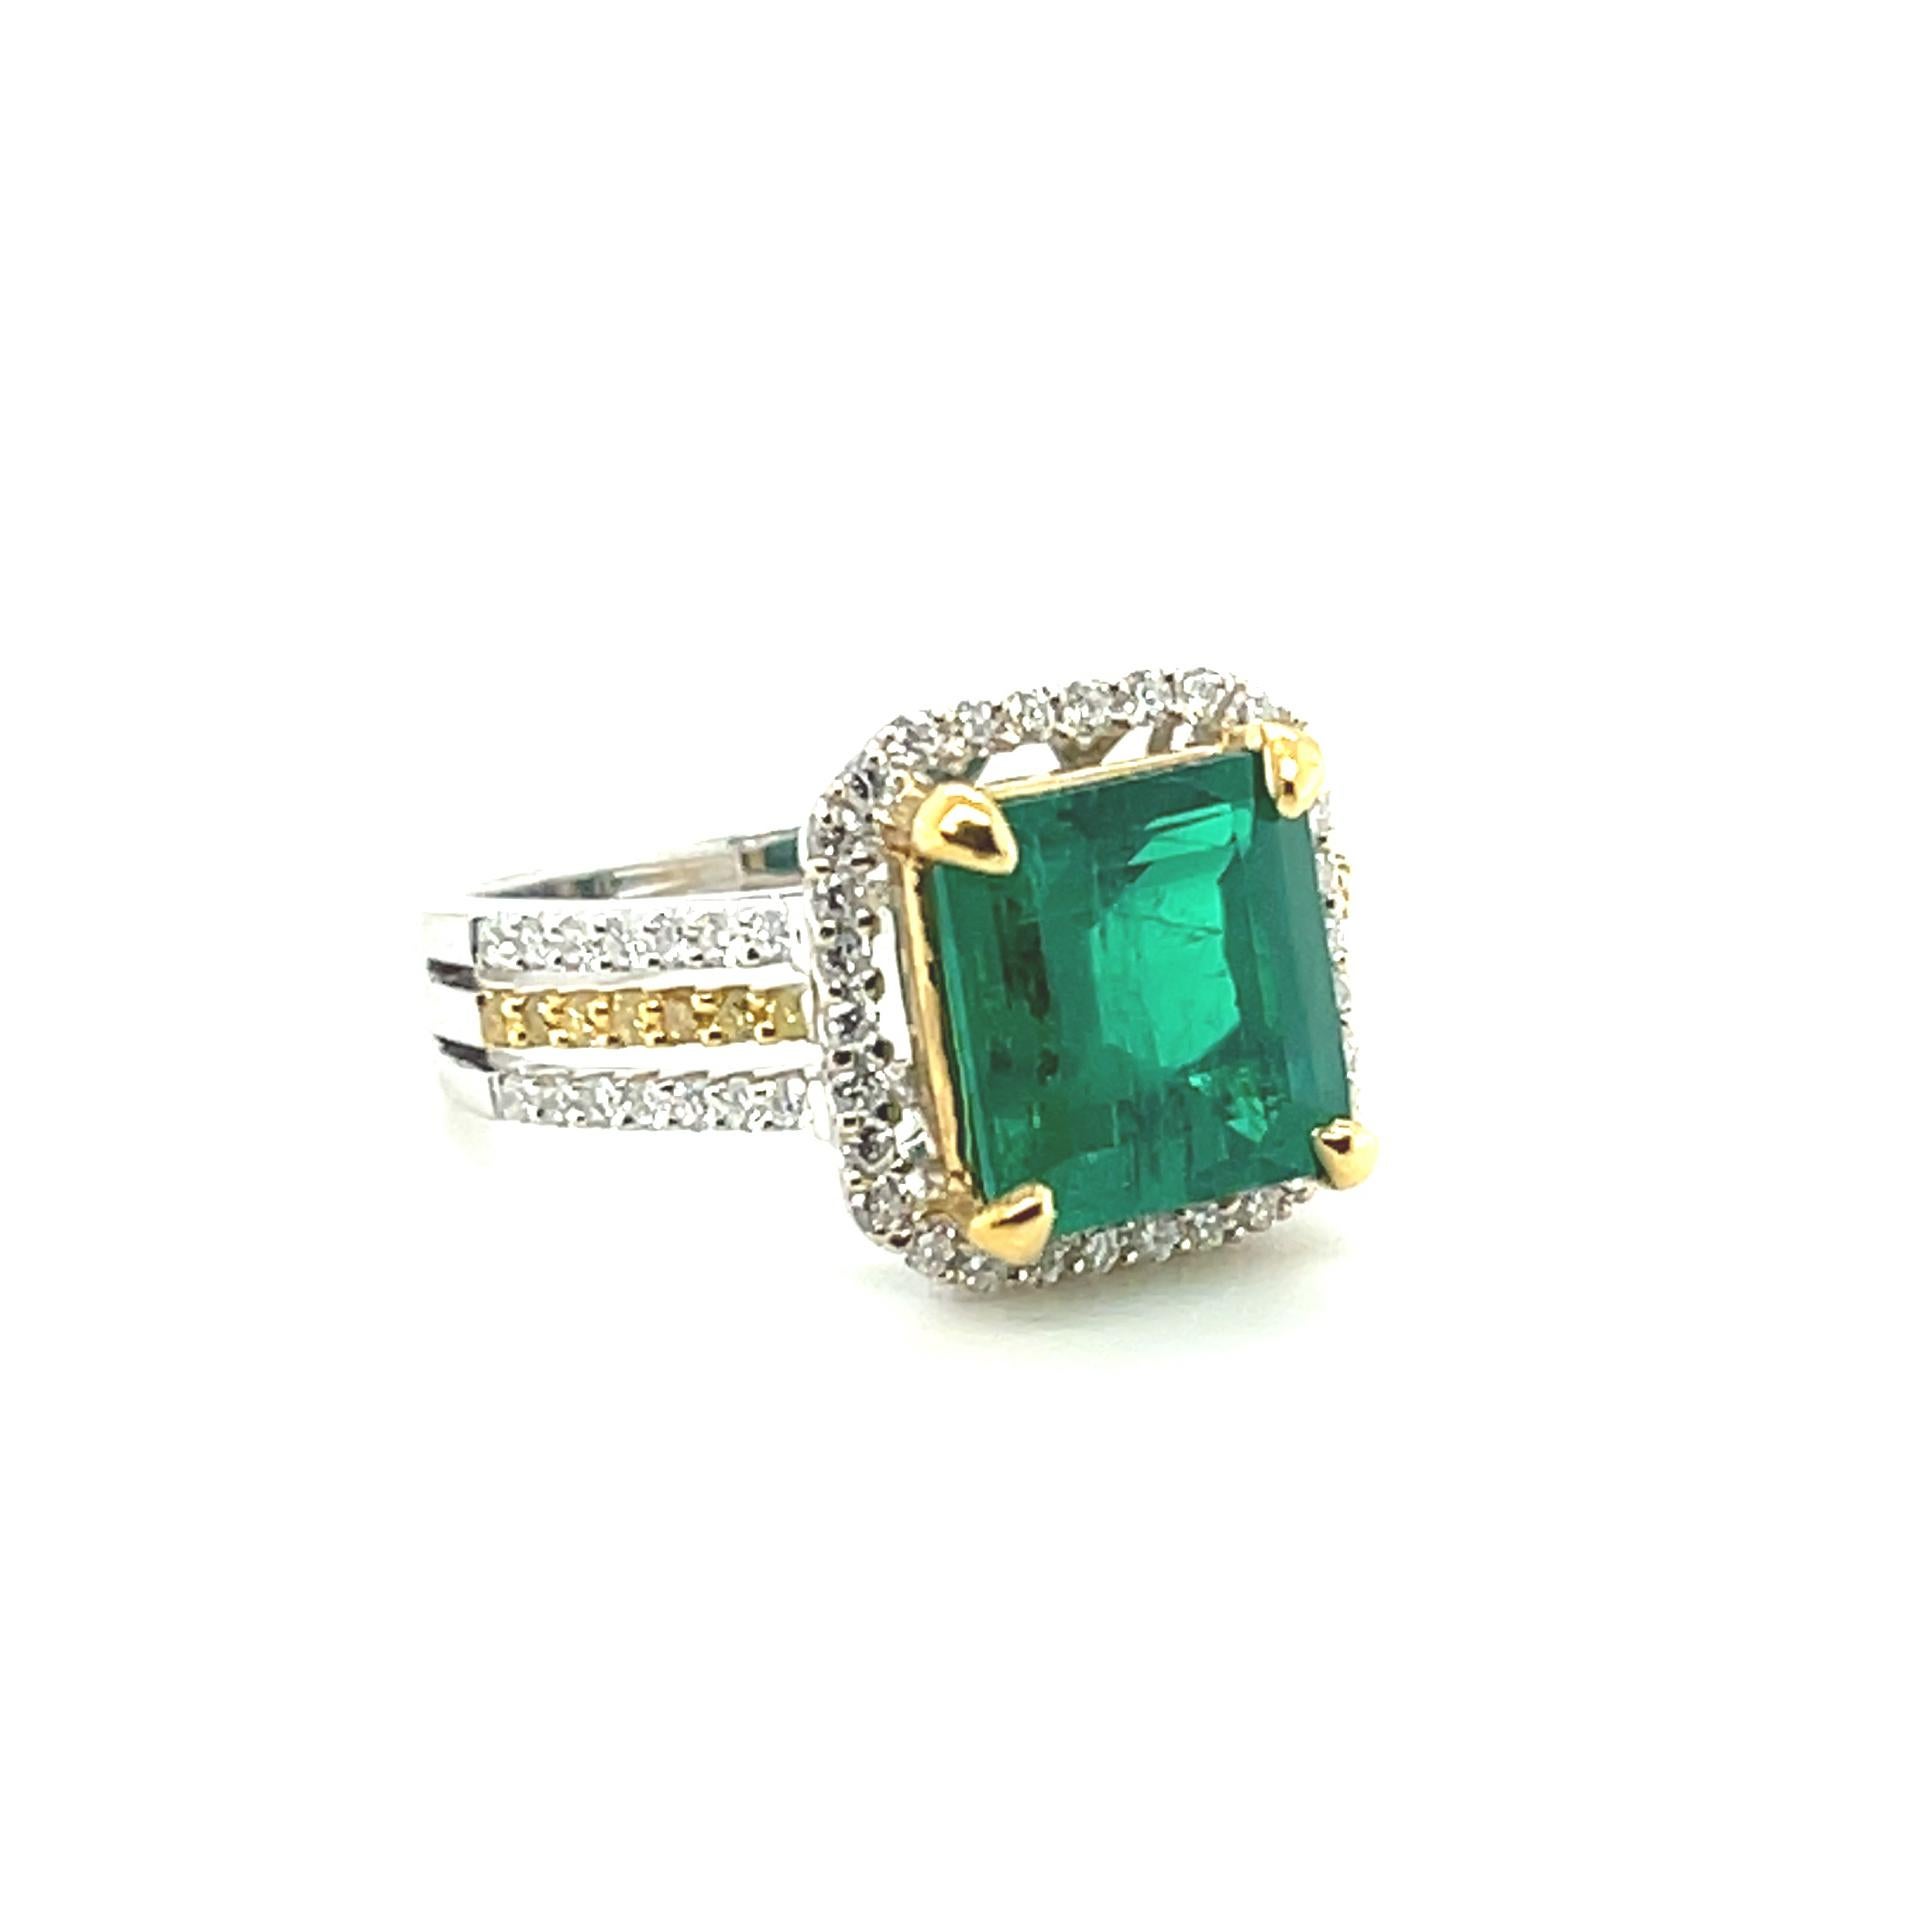 2.85 Carat Emerald Cocktail Ring with Canary and White Diamonds in 18k Gold For Sale 1